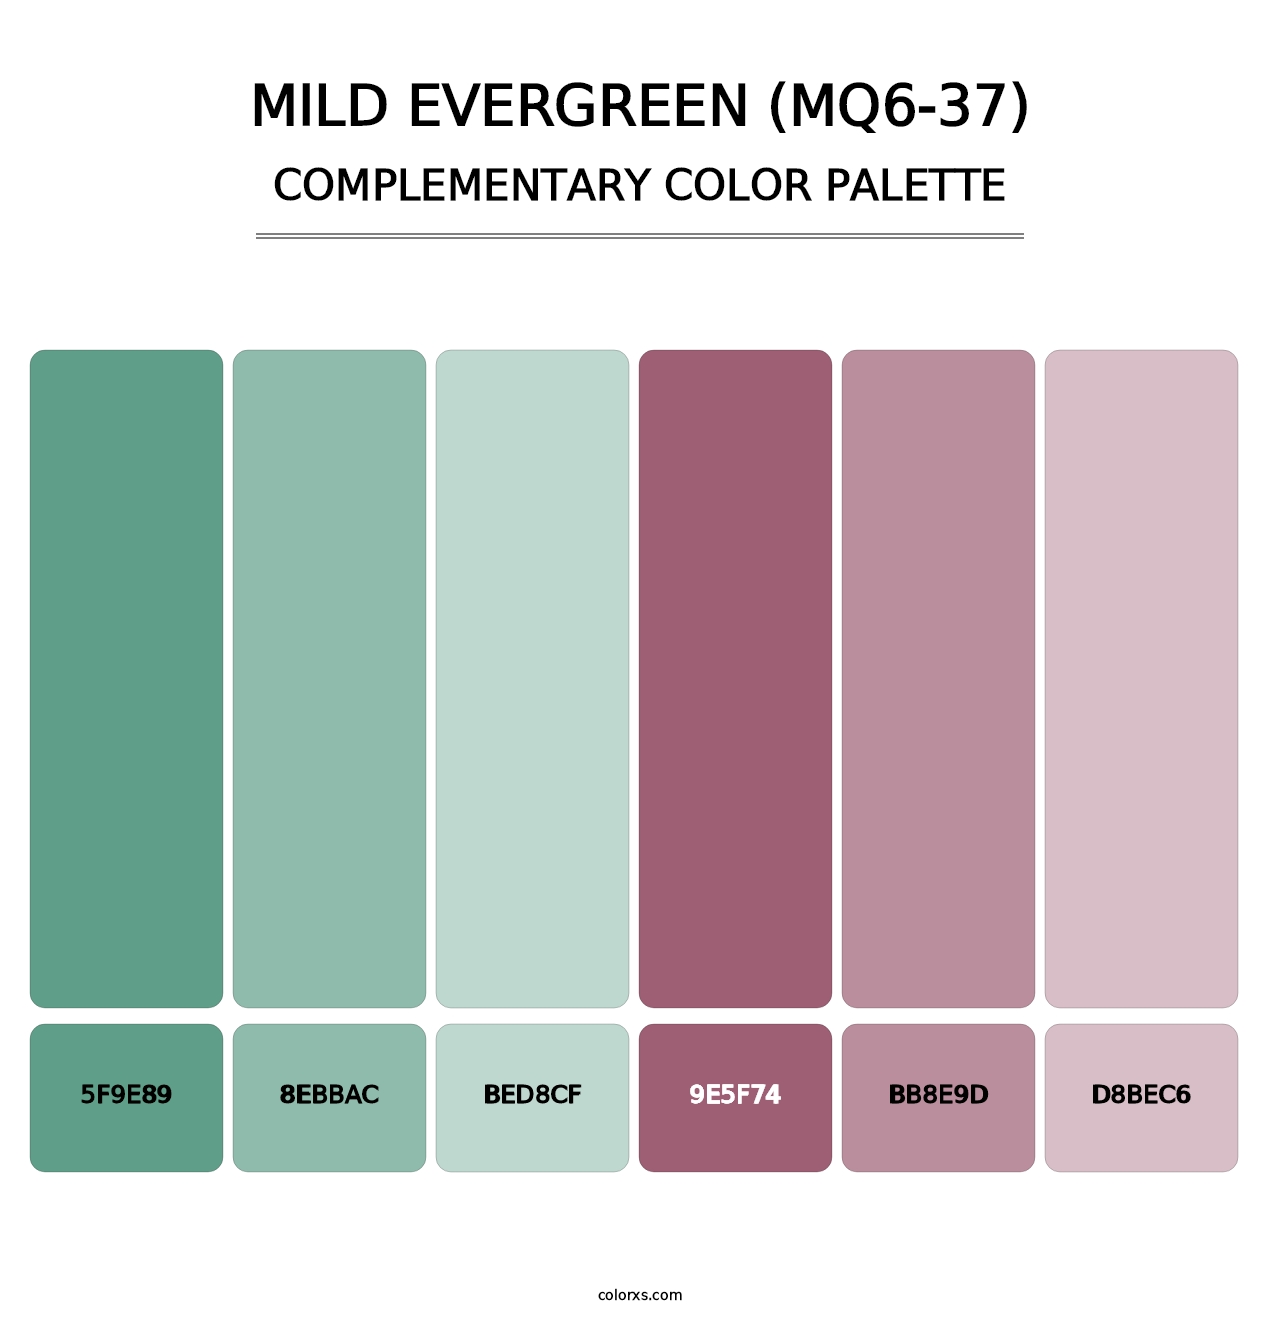 Mild Evergreen (MQ6-37) - Complementary Color Palette